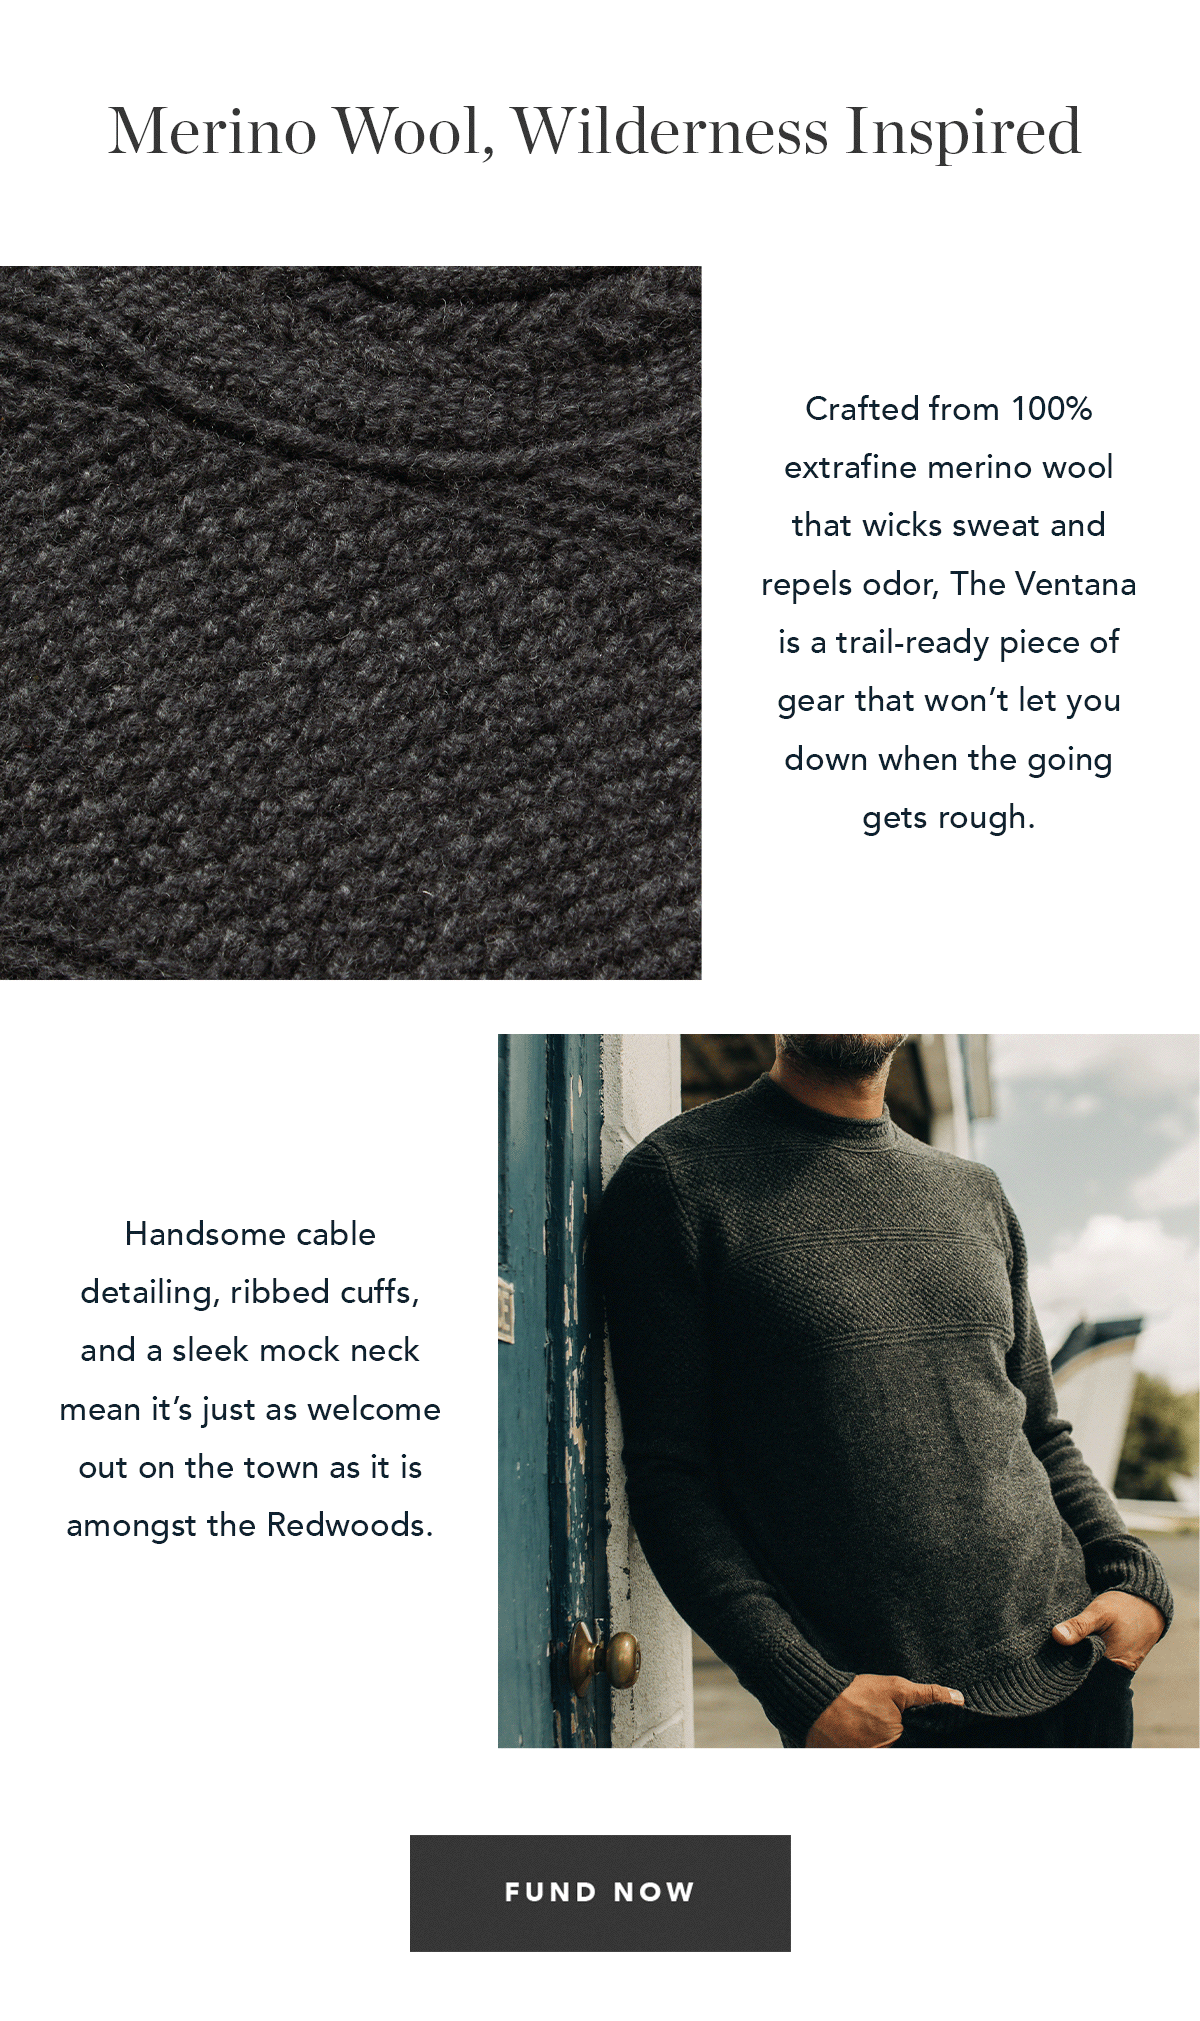 Crafted from 100% extrafine merino wool that wicks sweat and repels odor, The Ventana is a trail-ready piece of gear that won’t let you down when the going gets rough. Handsome cable detailing, ribbed cuffs, and a sleek mock neck mean it’s just as welcome out on the town as it is amongst the Redwoods.